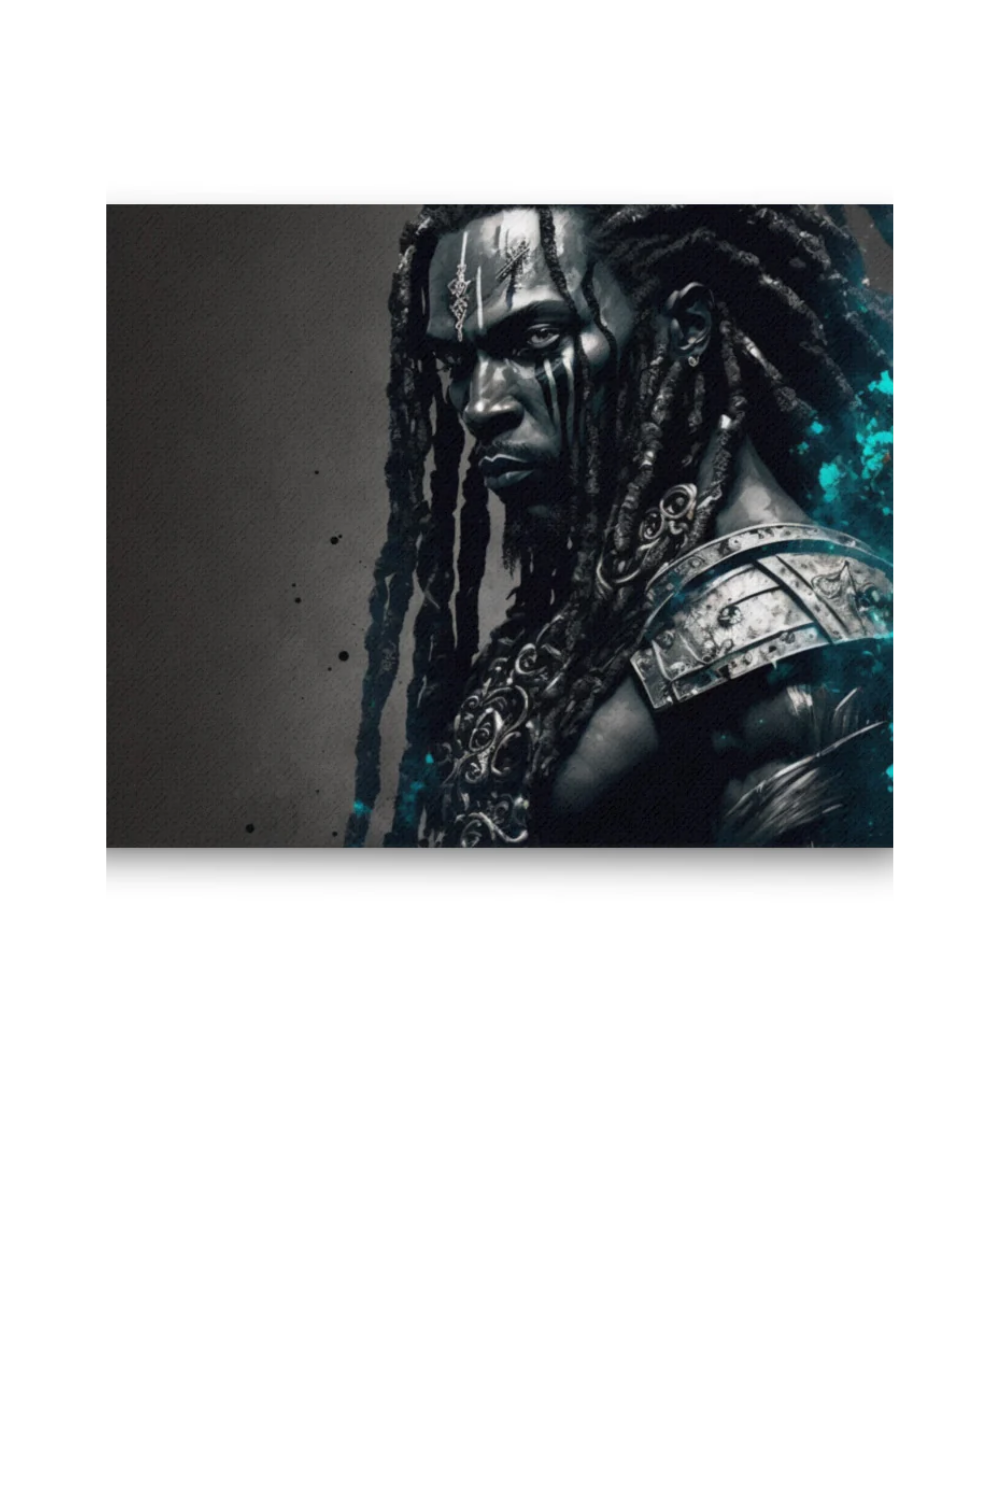 African-Warrior-They-Call-Me-Cane-Canvas-Print